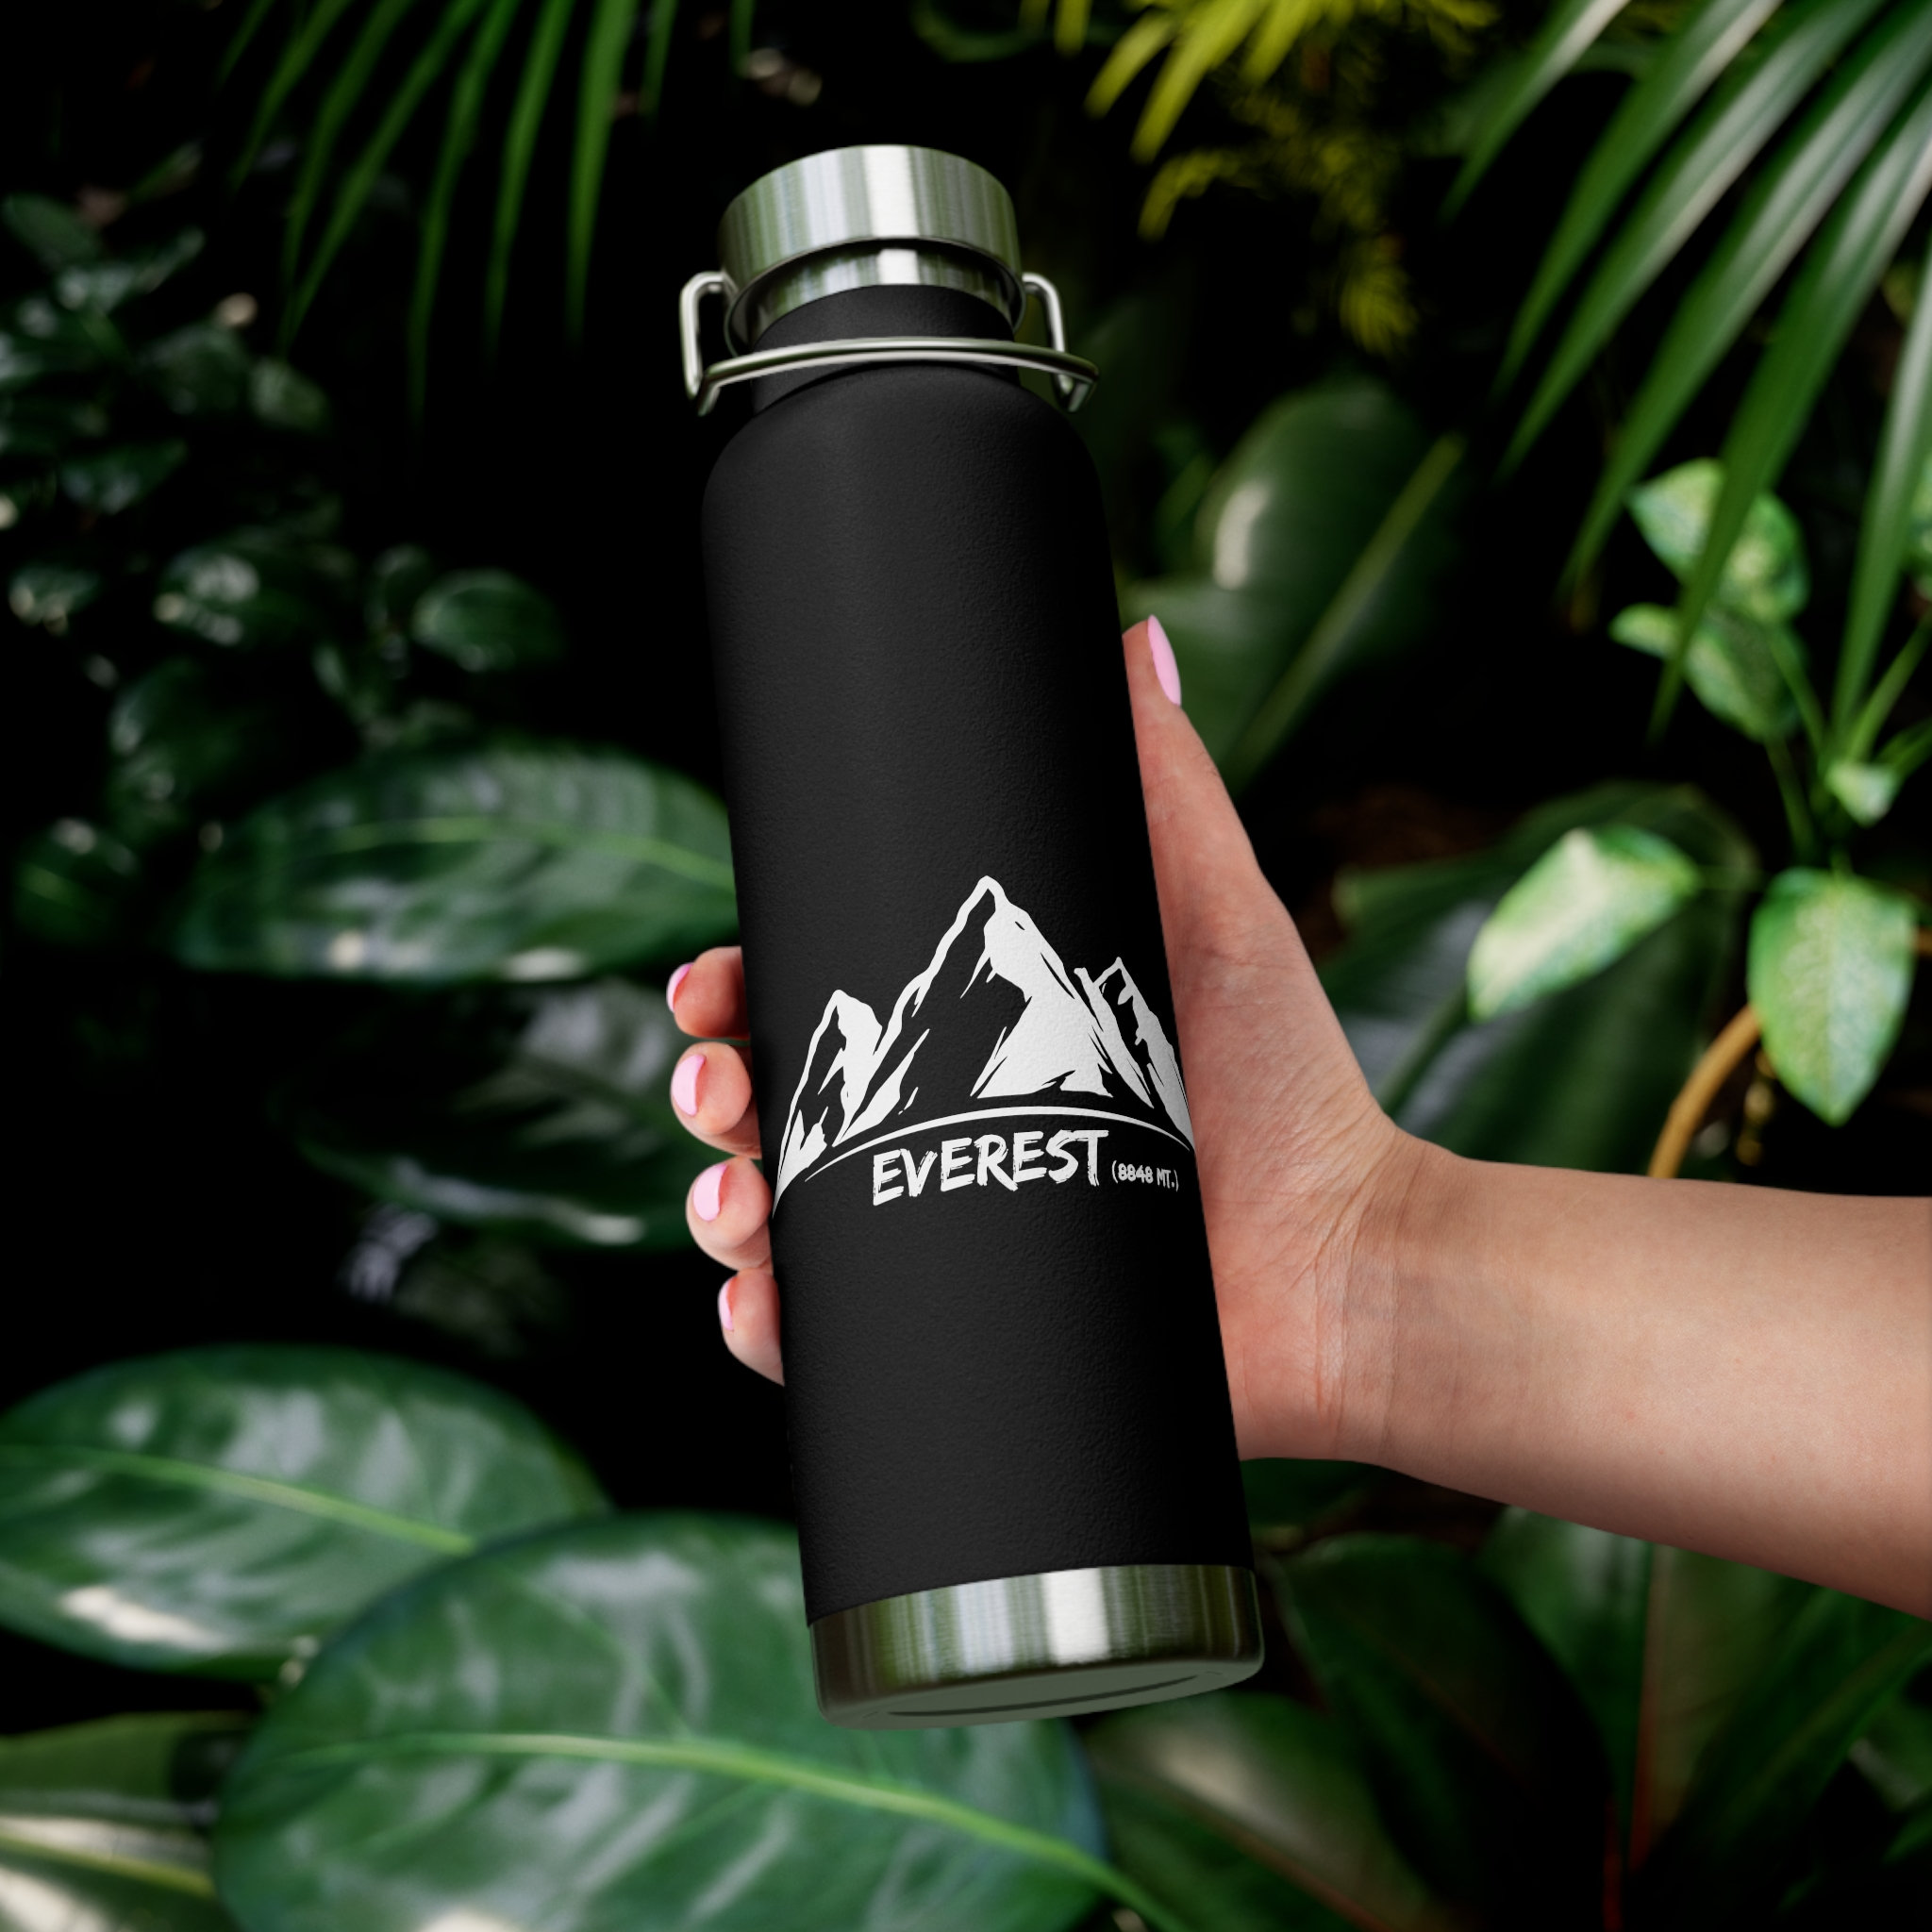 Thermos The Rock Beverage Bottle